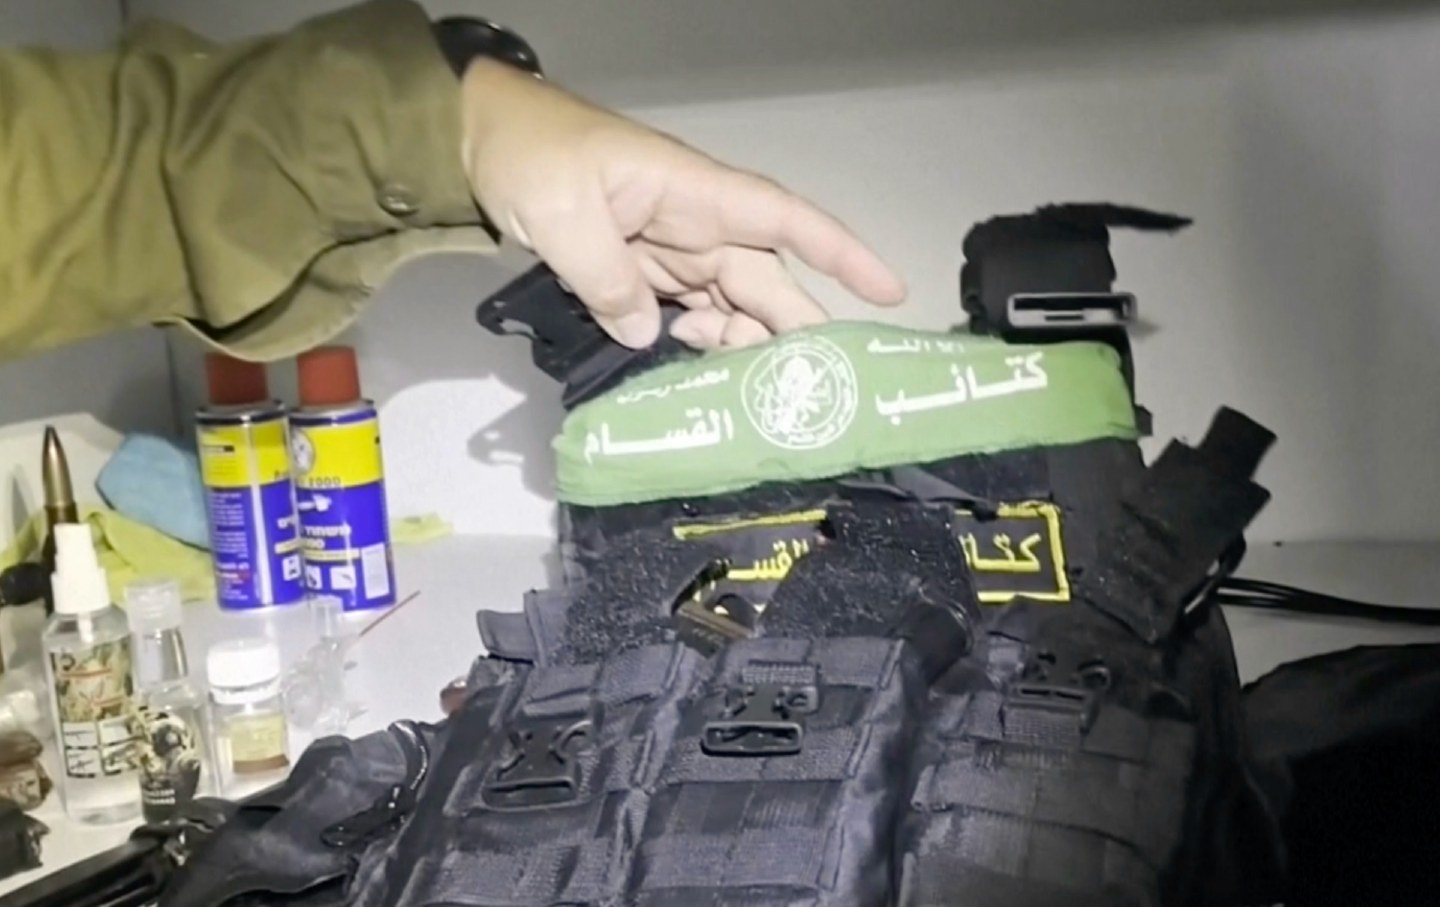 An arm wearing a green shirt holds up a bulletproof vest with a Hamas insignia